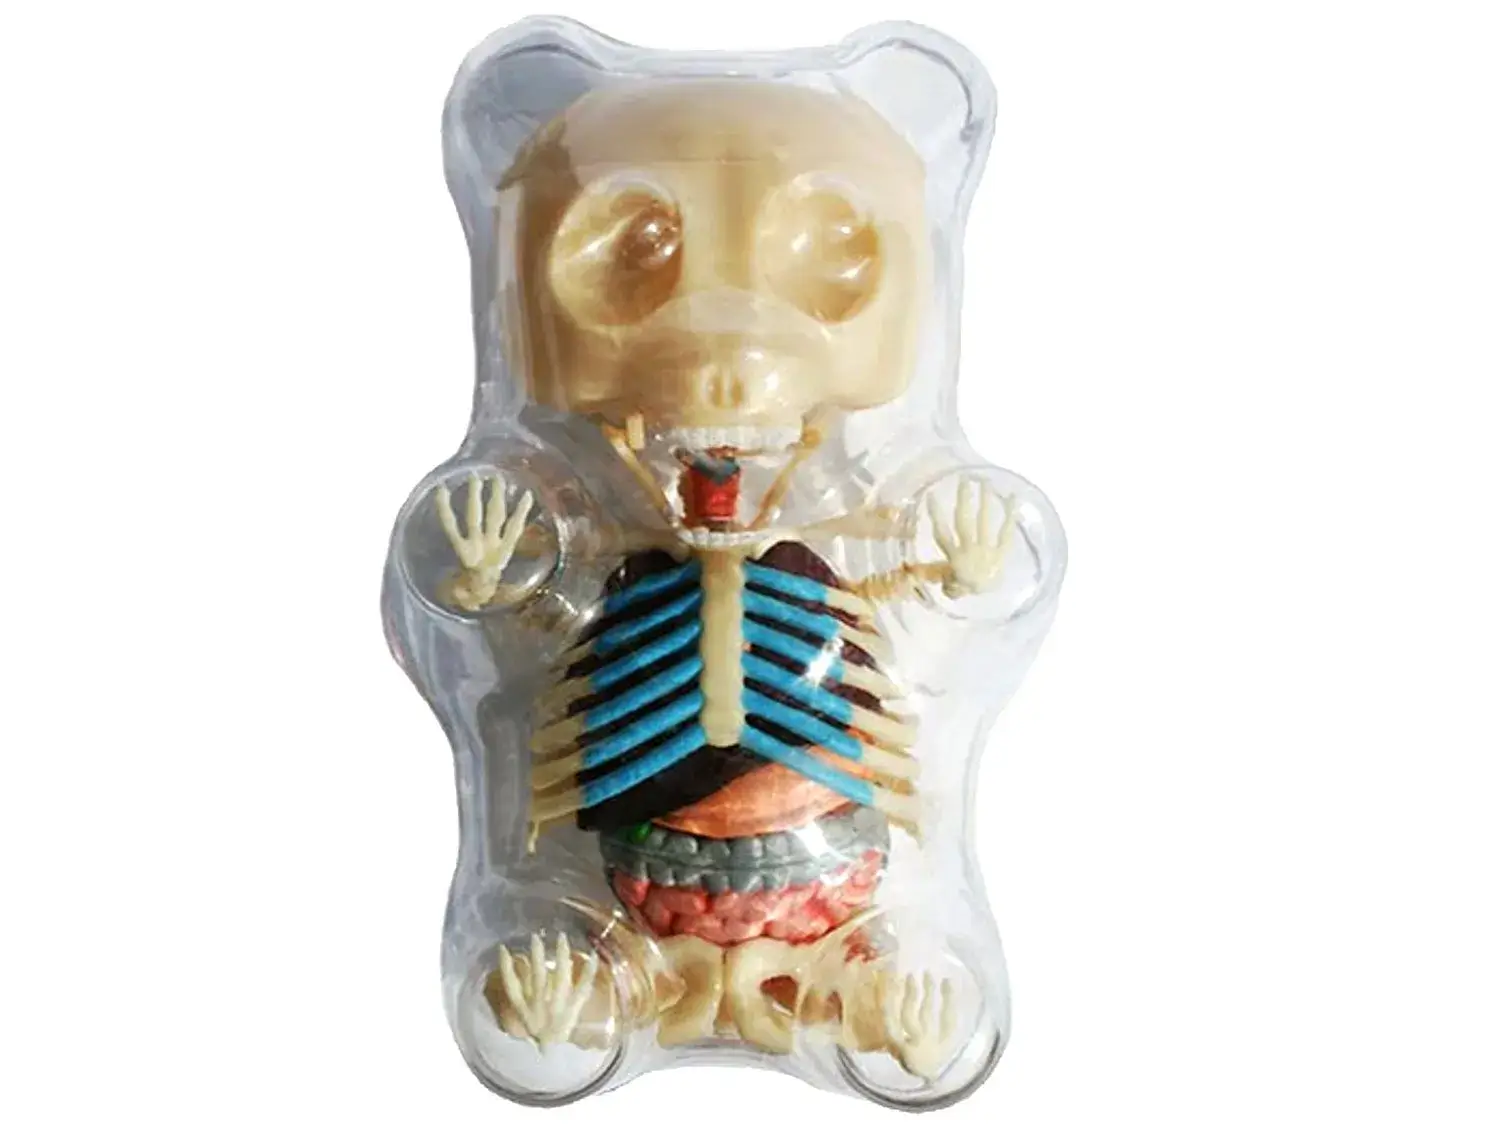 gummy bear with visible skeleton